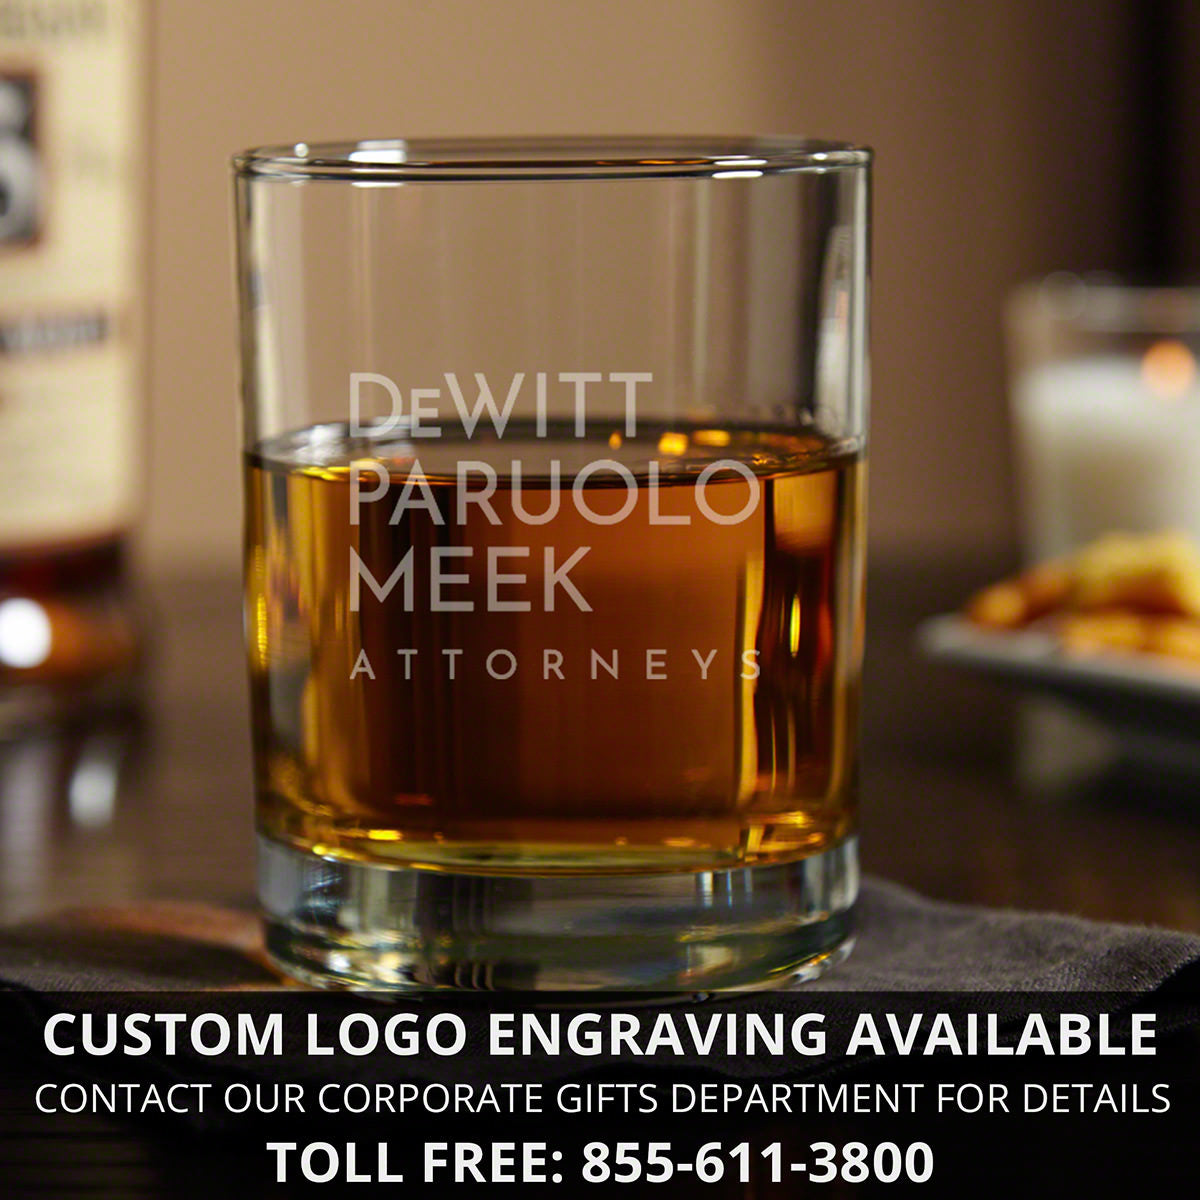 Personalized Ammo Can & Whiskey Groomsmen Gift Set - 5pc